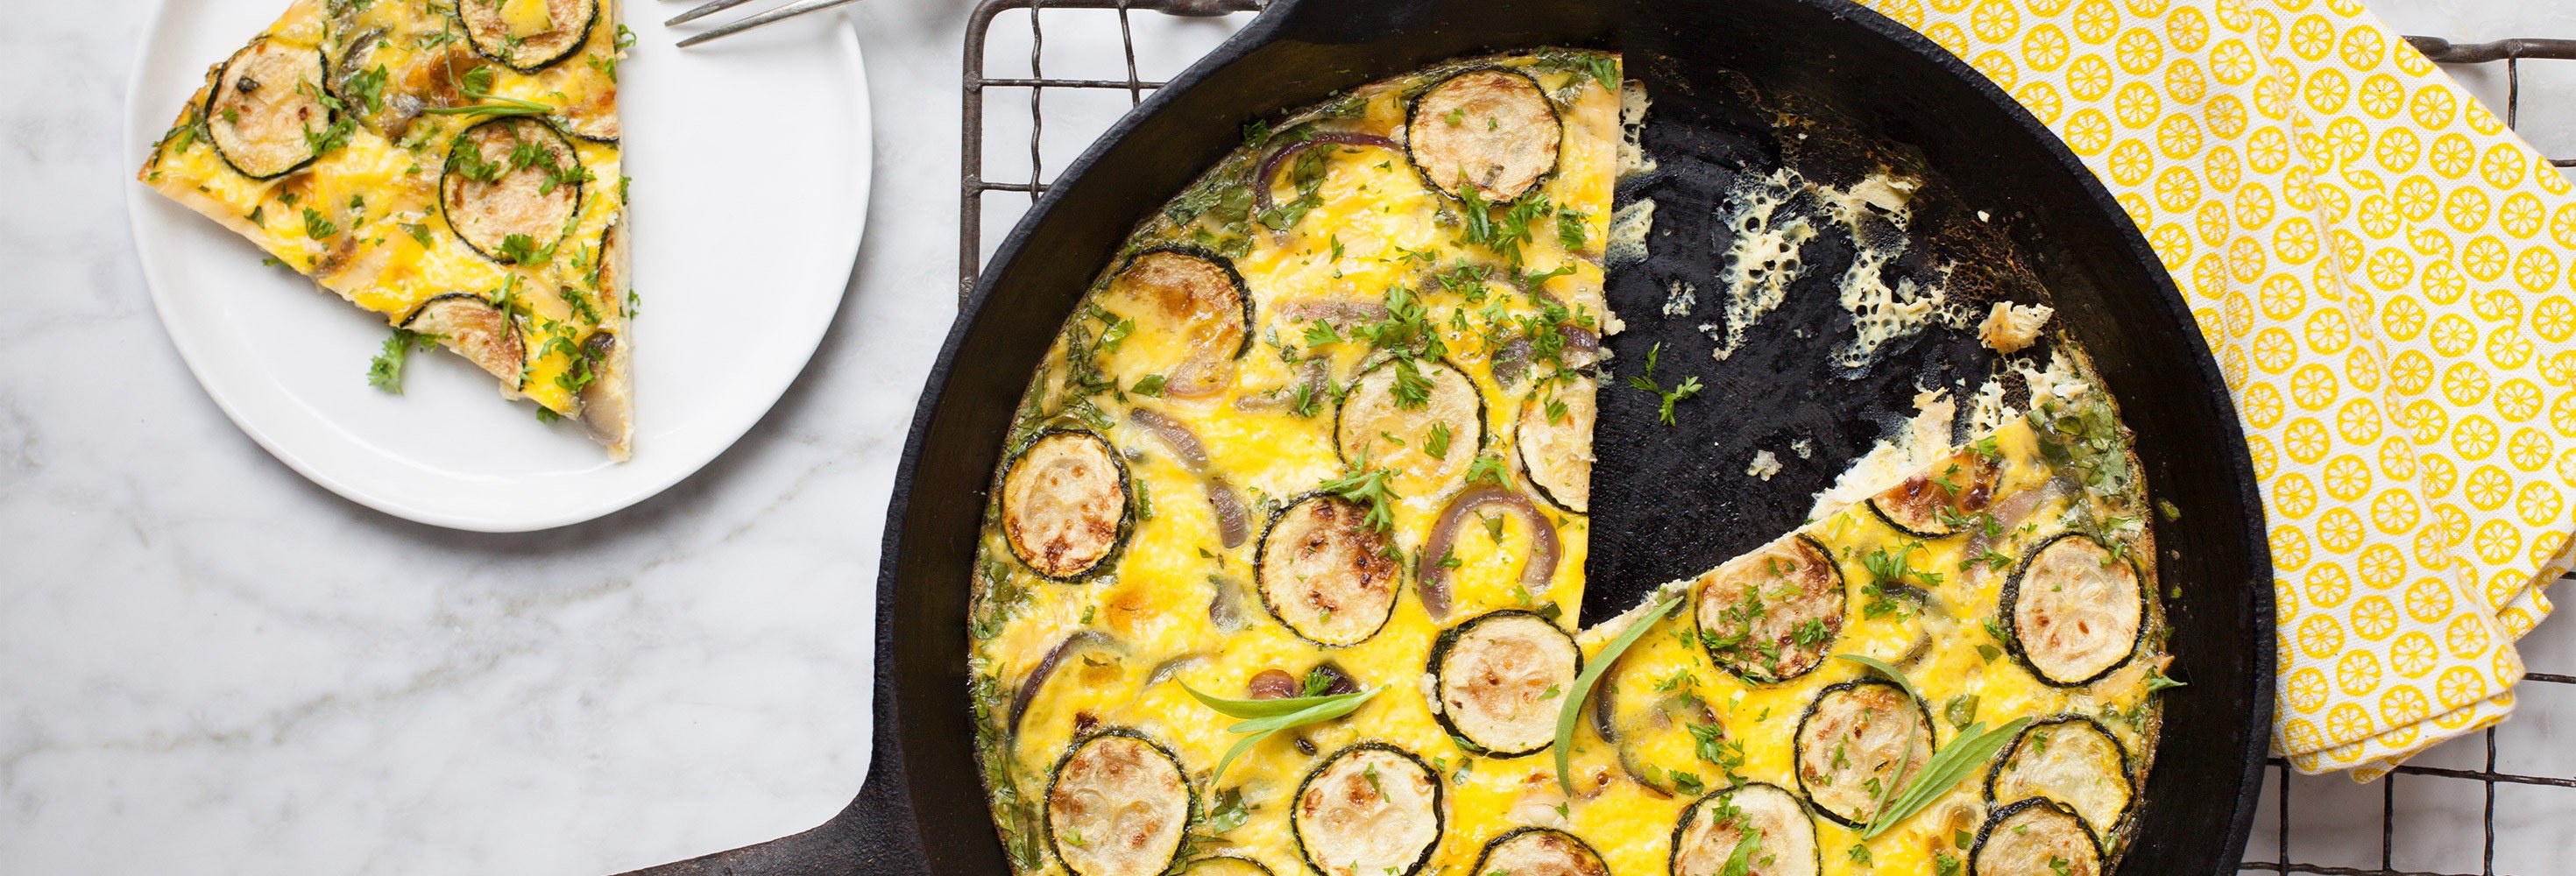 Img Courgettefrittata